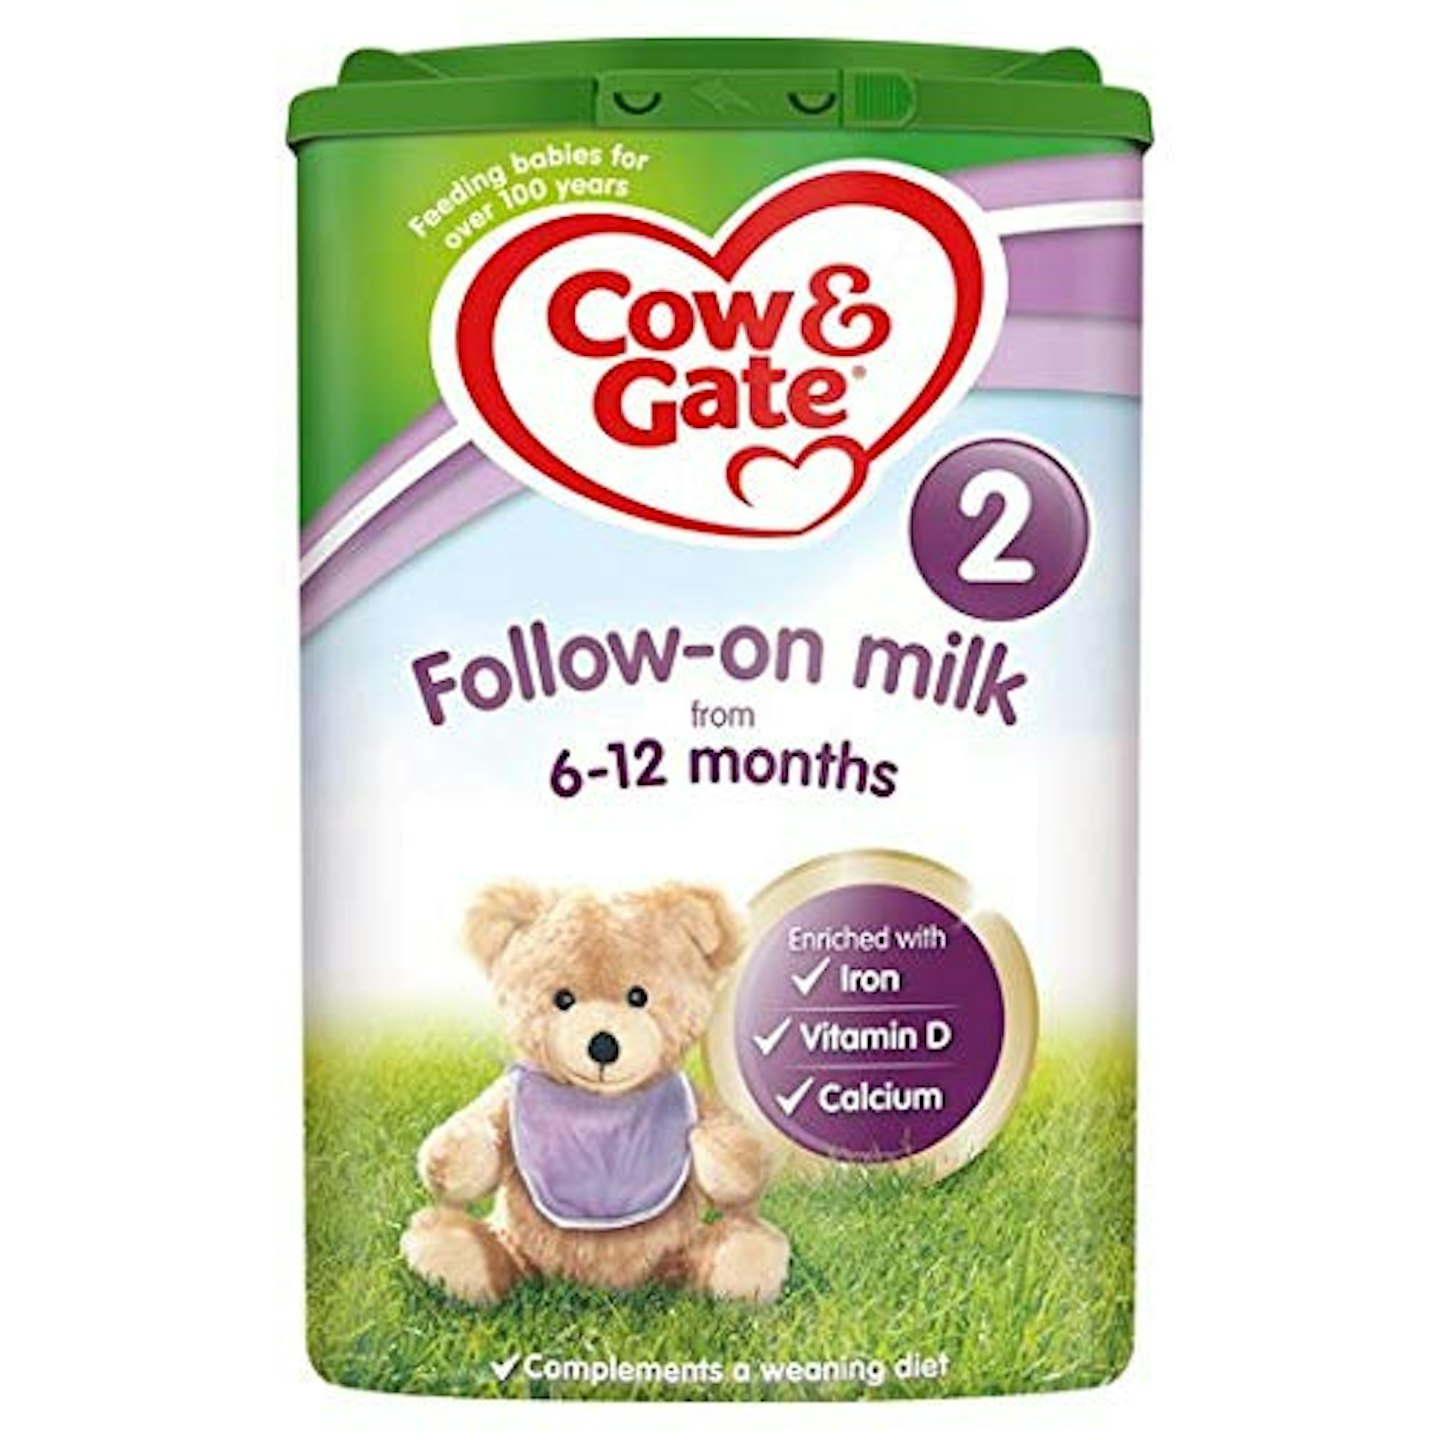 Cow u0026amp; Gate Follow-on milk Review